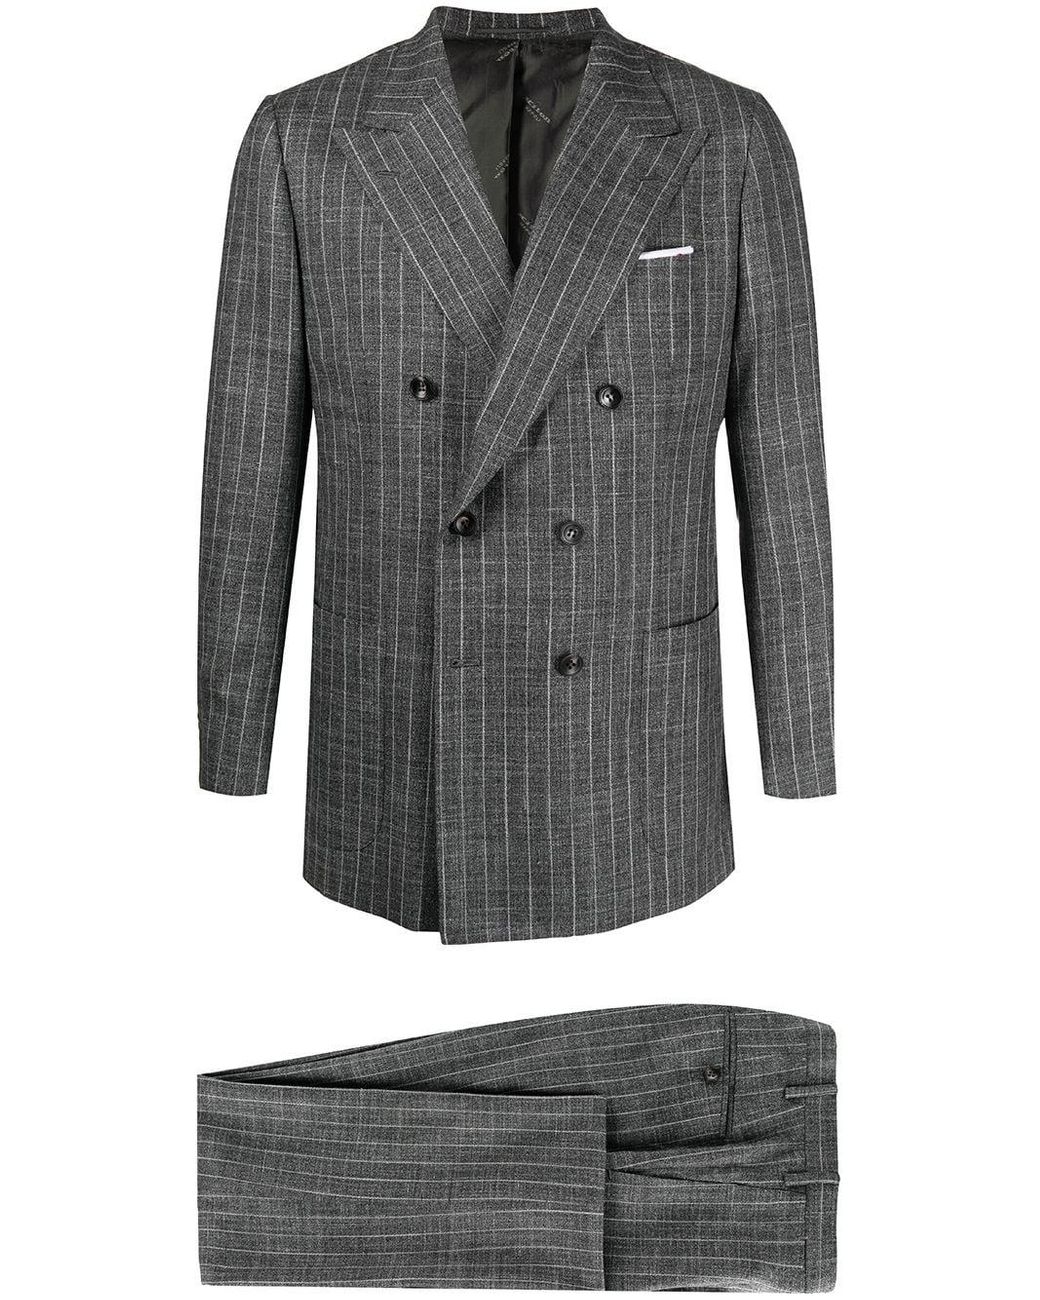 Kiton Pinstripe-pattern Double-breasted Suit in Grey (Gray) for Men - Lyst